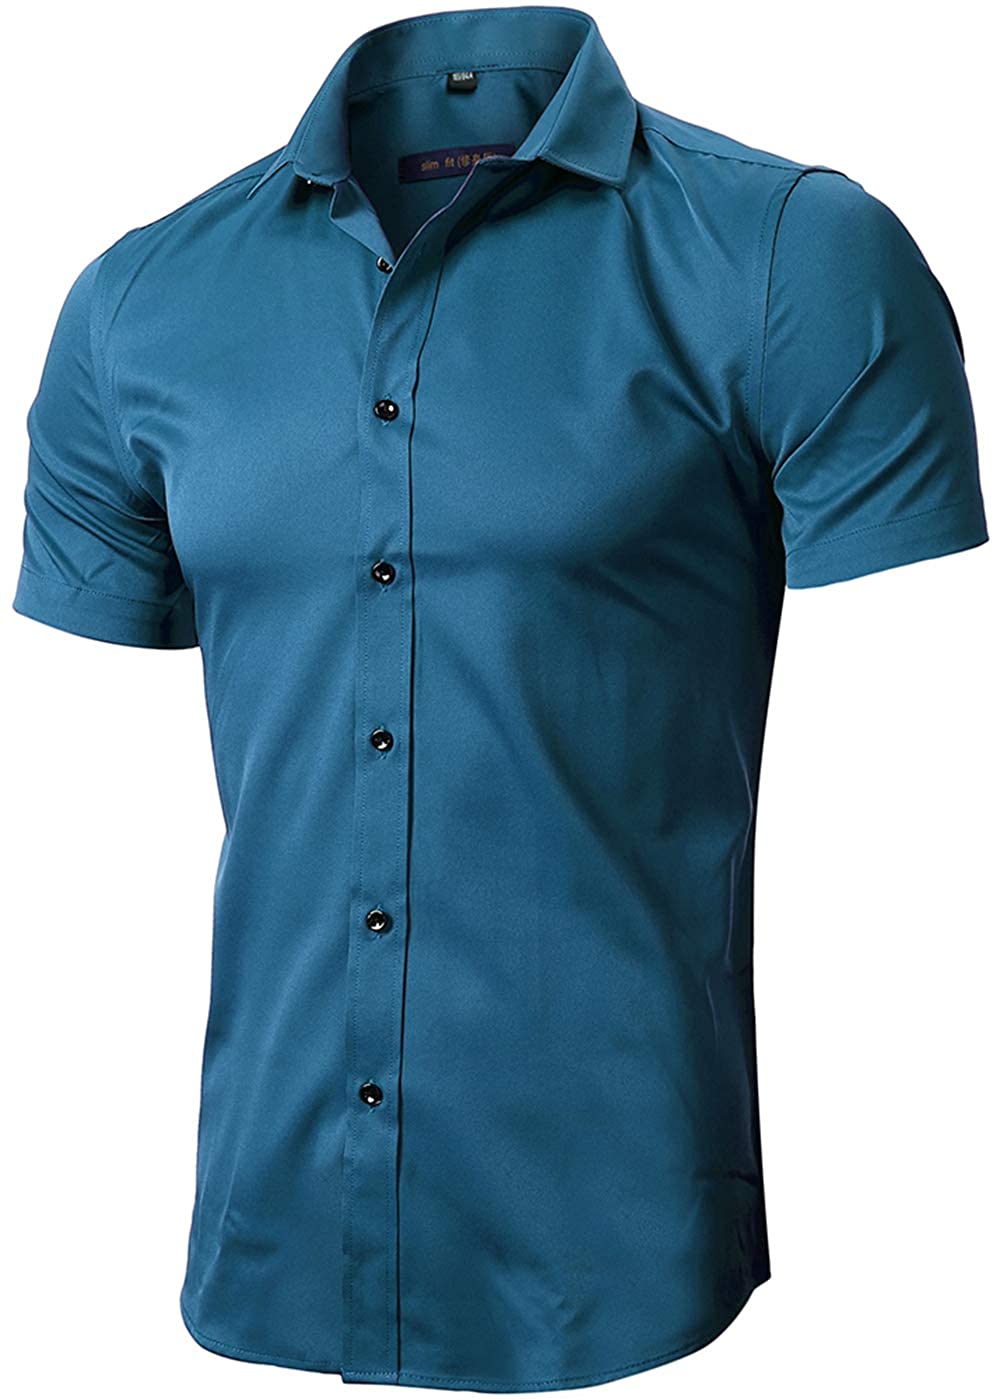 Fitted Bamboo Fiber Short Sleeve Elastic Casual Button Down Shirts FLY HAWK Mens Dress Shirts